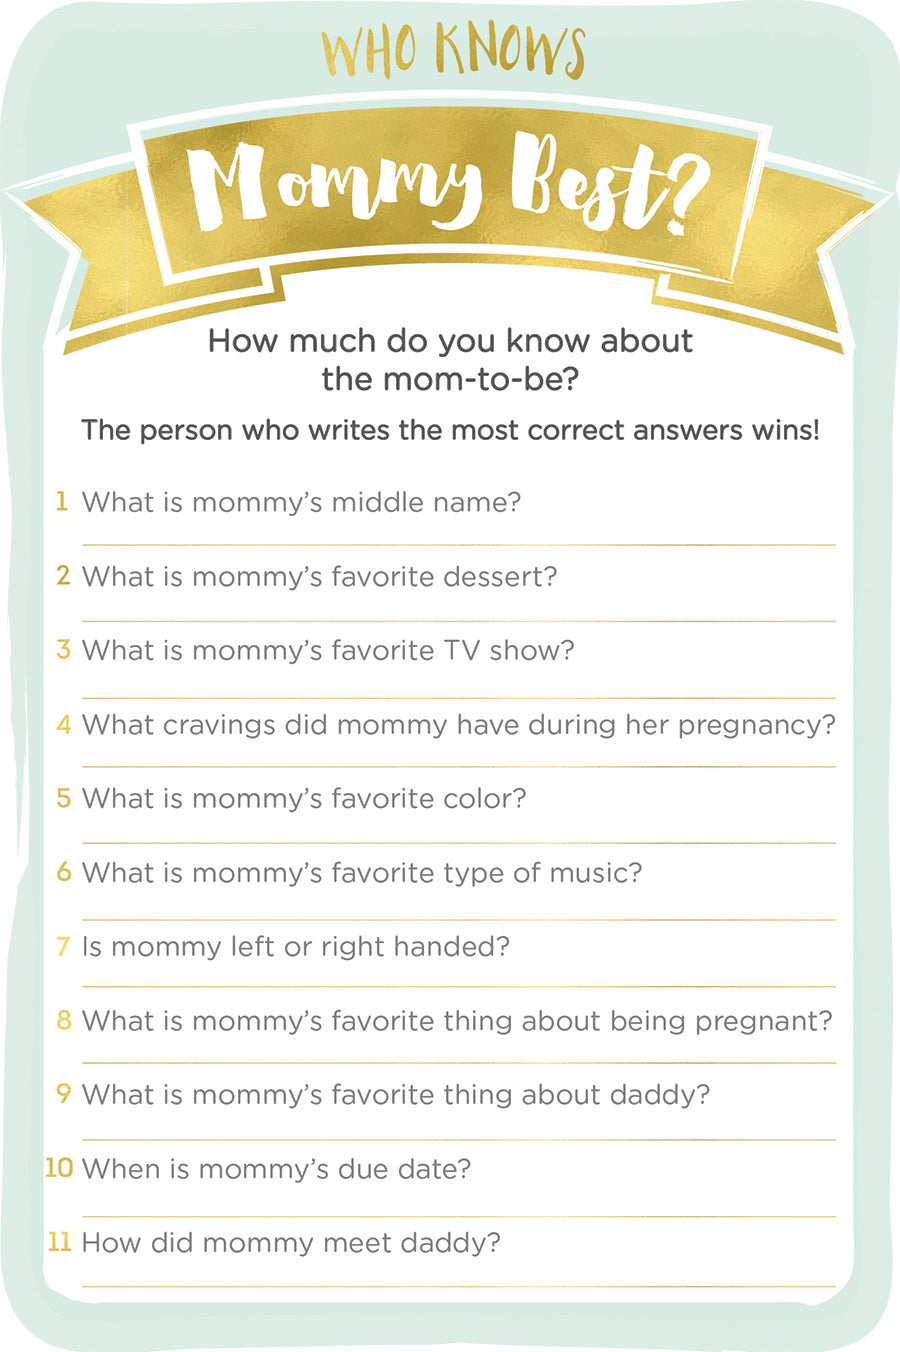 Who Knows Mommy Best Printable | 3 Baby Shower Games We Love | Baby Aspen